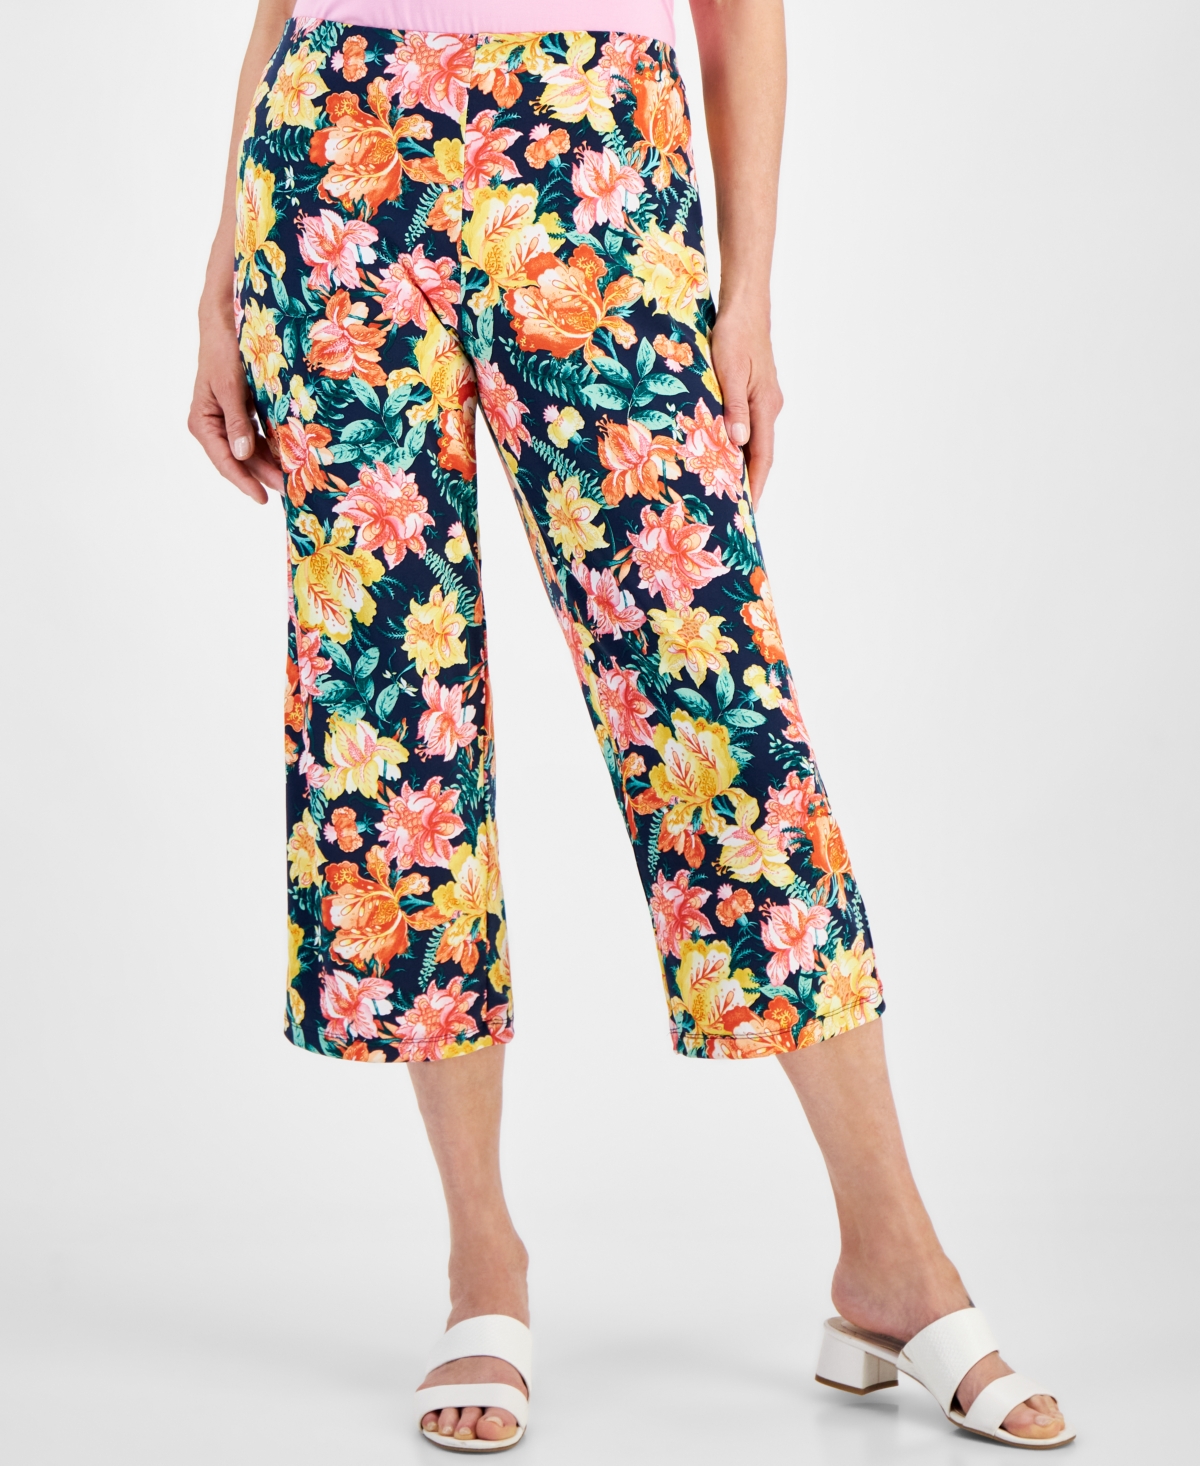 Women's Printed Culotte Pants, Created for Macy's - Blossom Berry Combo